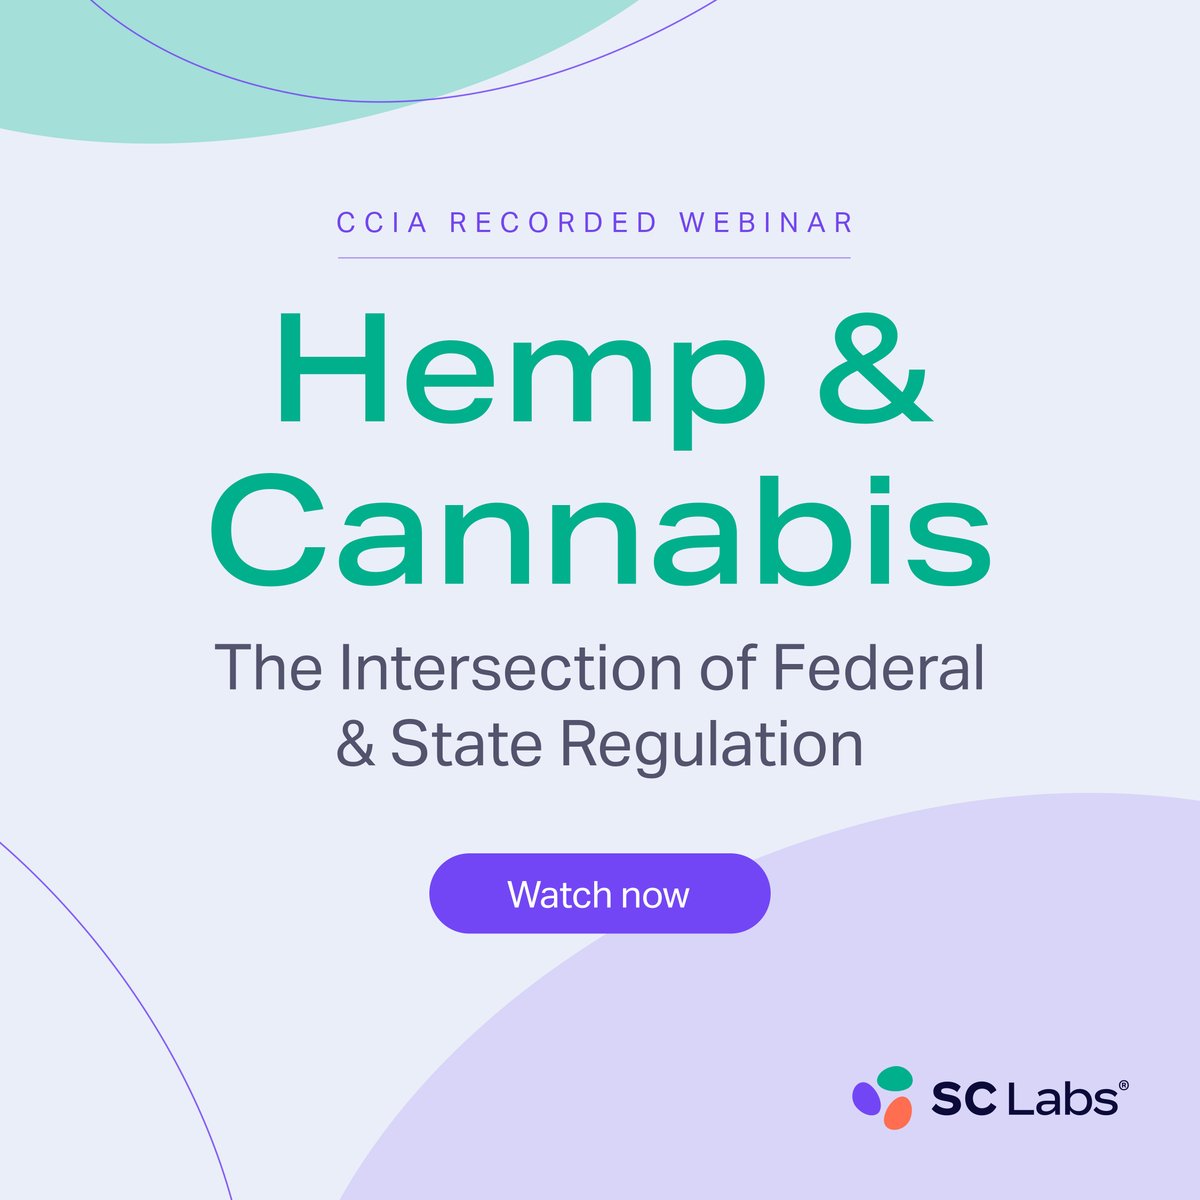 Join WeedWeek's Alex Halperin in an informative chat with SC Labs CCO/Cofounder Josh Wurzer and other industry heavyweights as they discuss hemp, and the emerging industry’s intersection with legal cannabis.

hubs.ly/Q0229x340

#cannabistesting #hemptesting #hemp #cbd